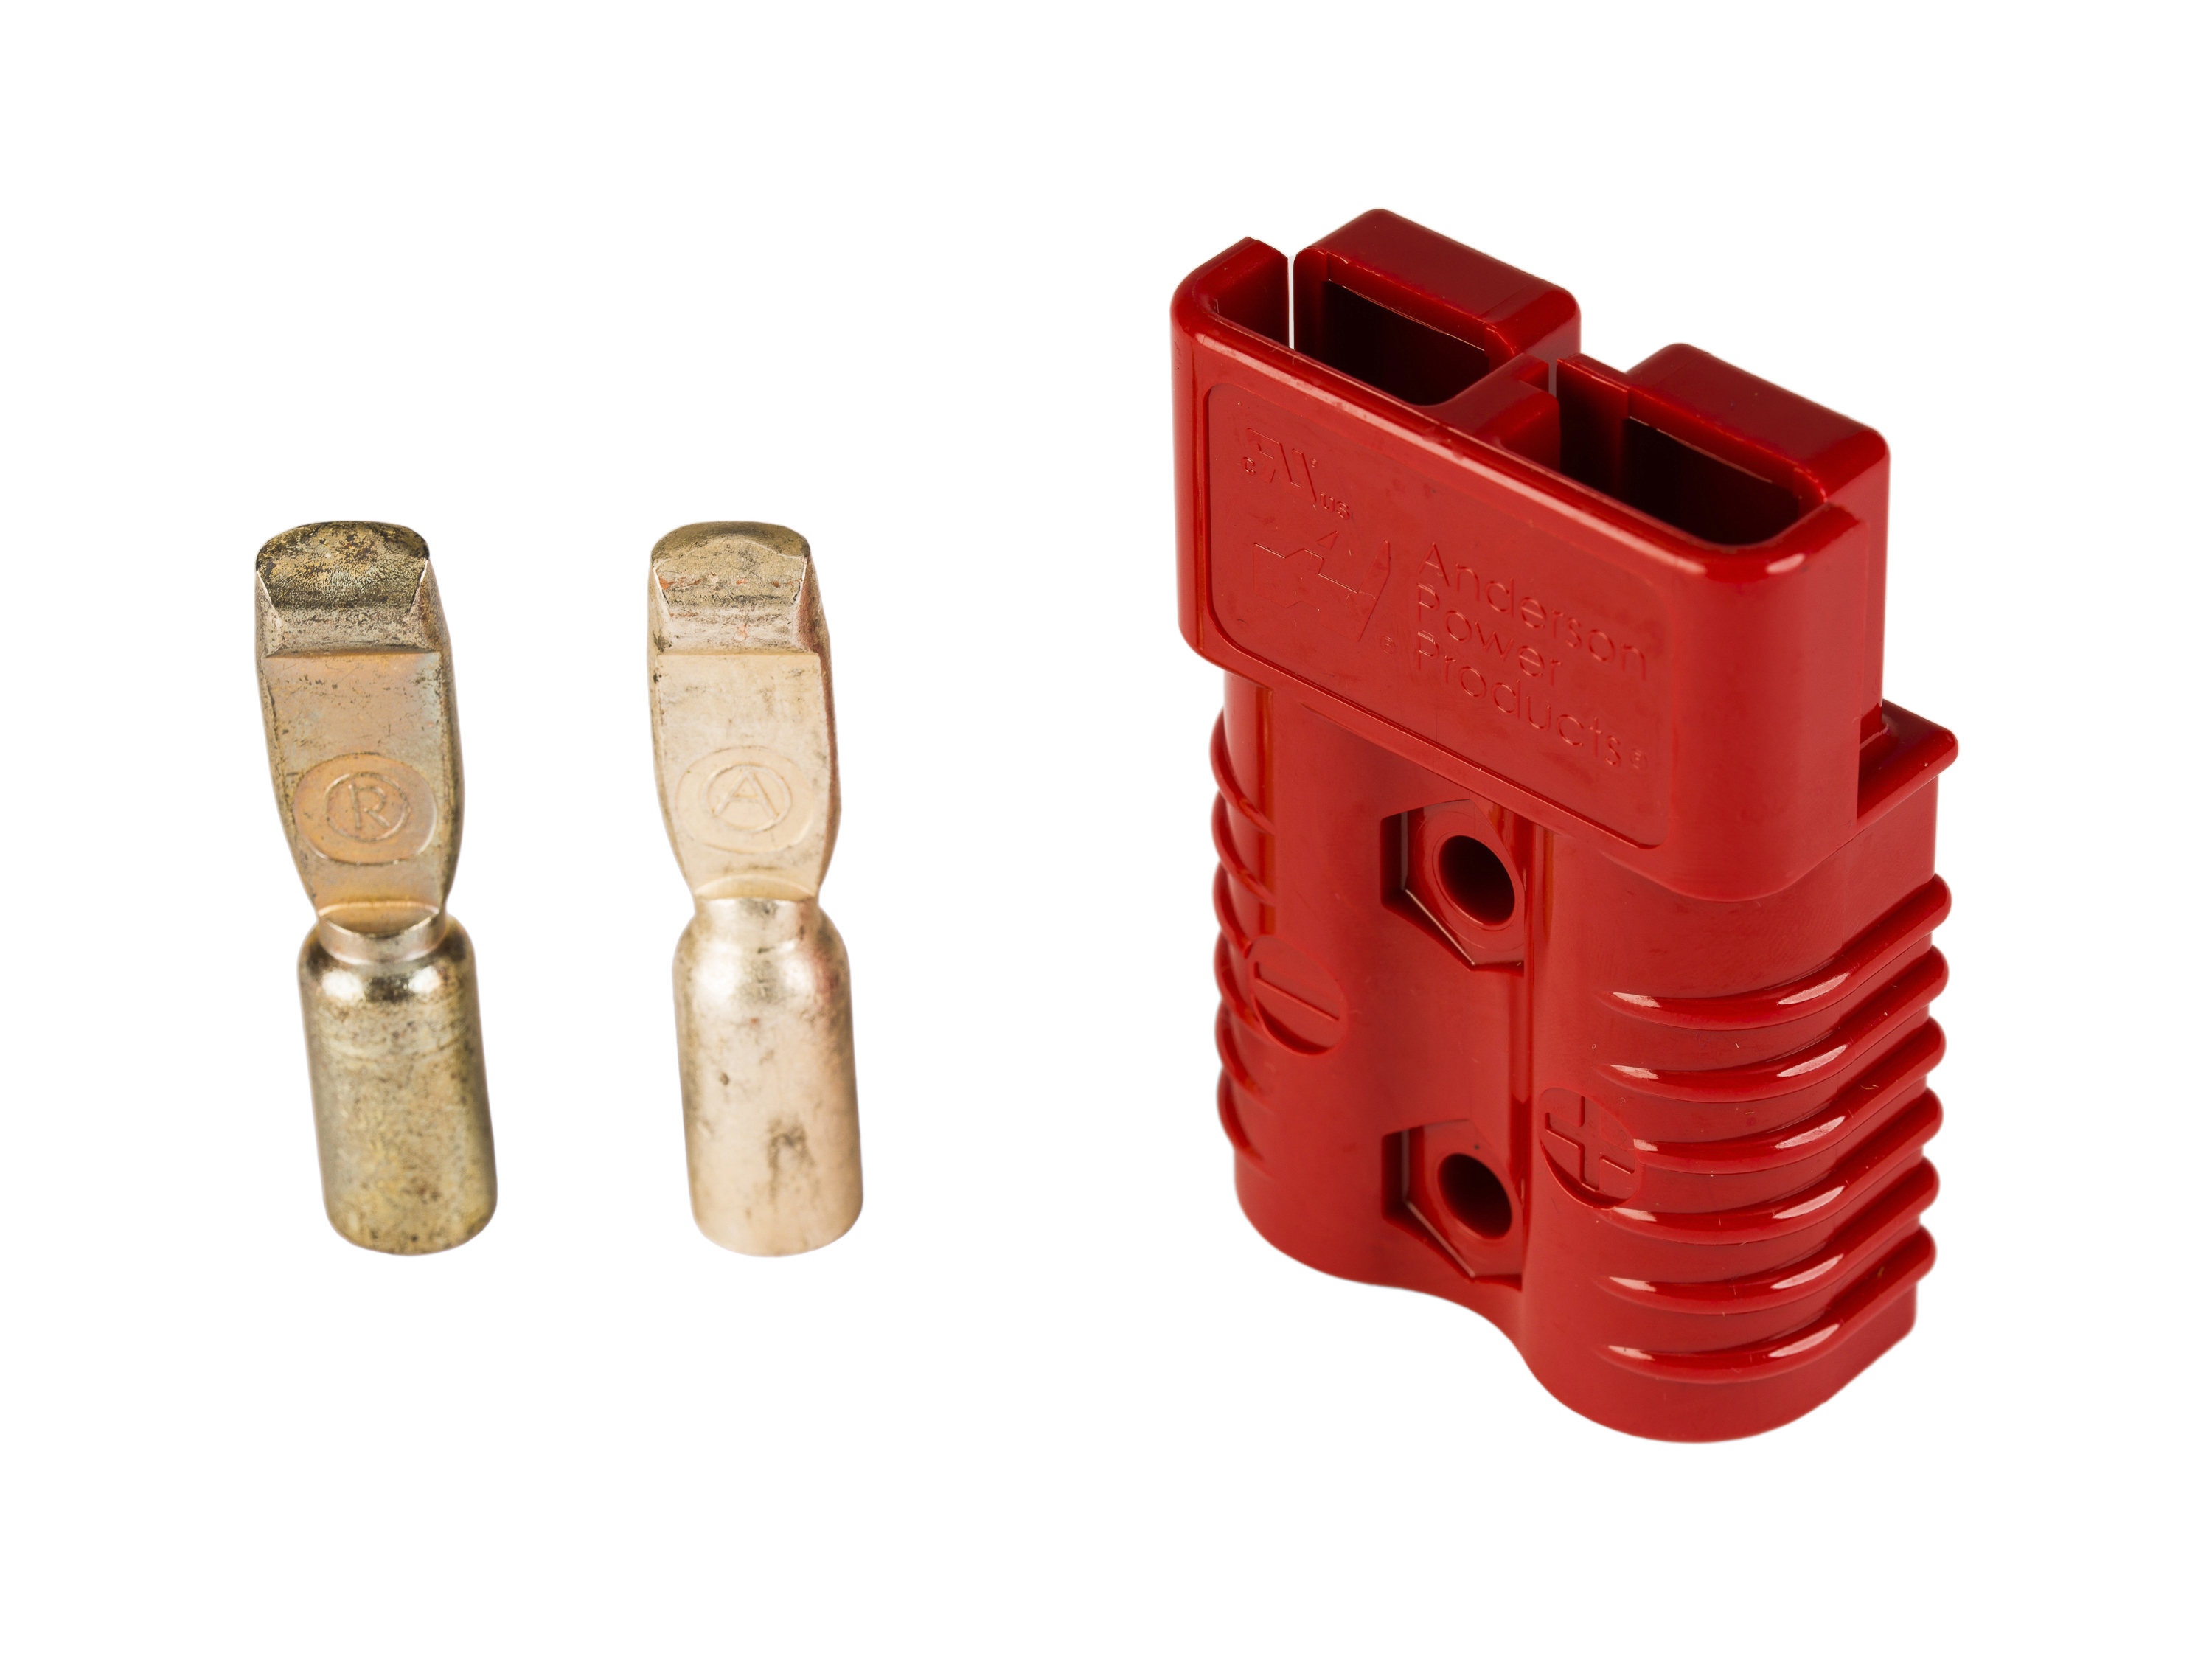 Anderson Power Products Connector SB175 Red- AWG1/0 (53.5mm²) - 6329G1